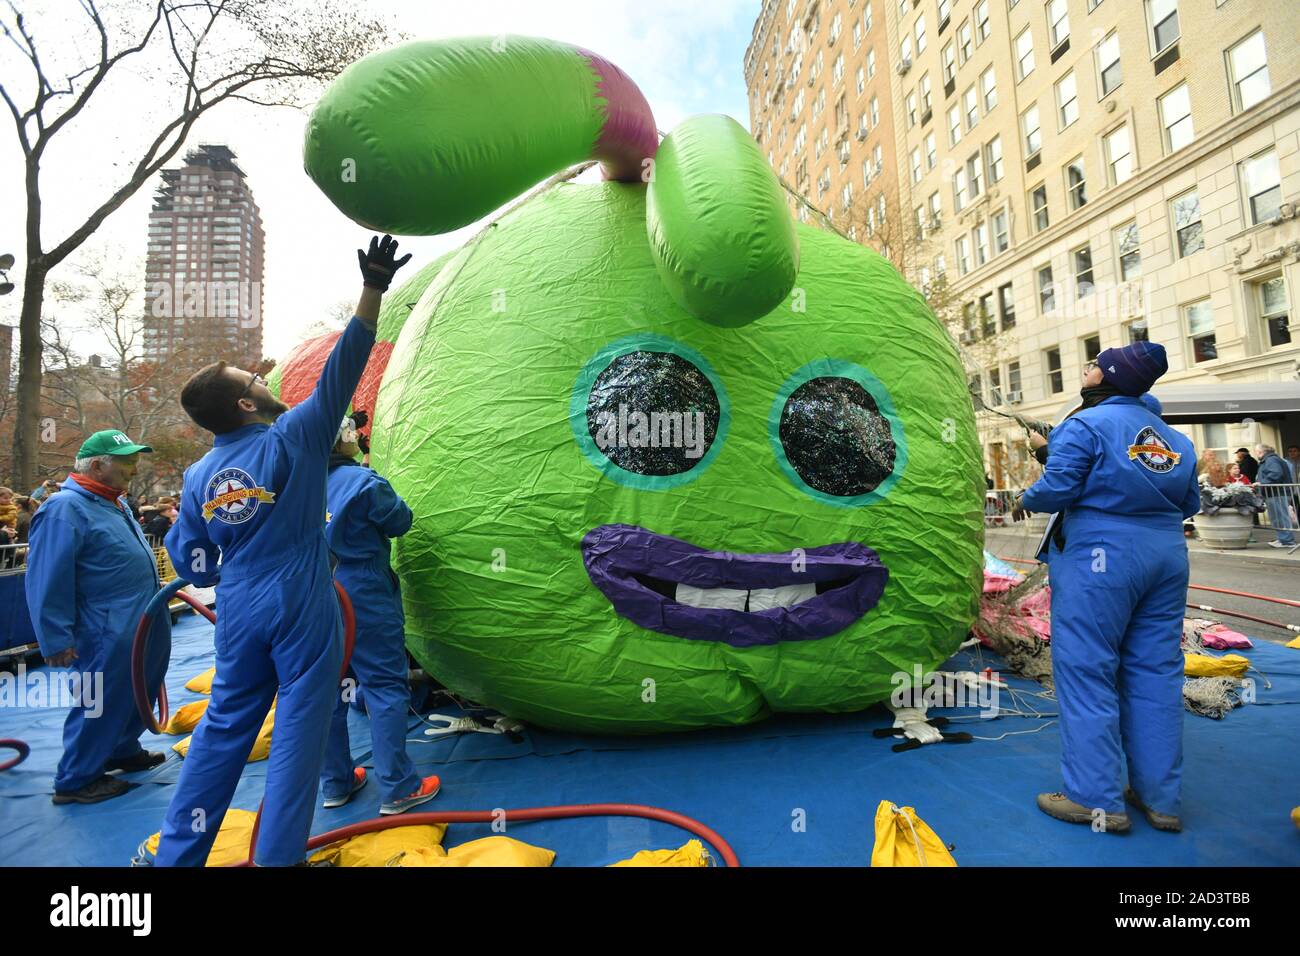 The Macy's Thanksgiving Day Parade balloons are inflated in front of the public on the Upper West Side on Thanksgiving Eve, New York, USA - 27 Nov 201 Stock Photo